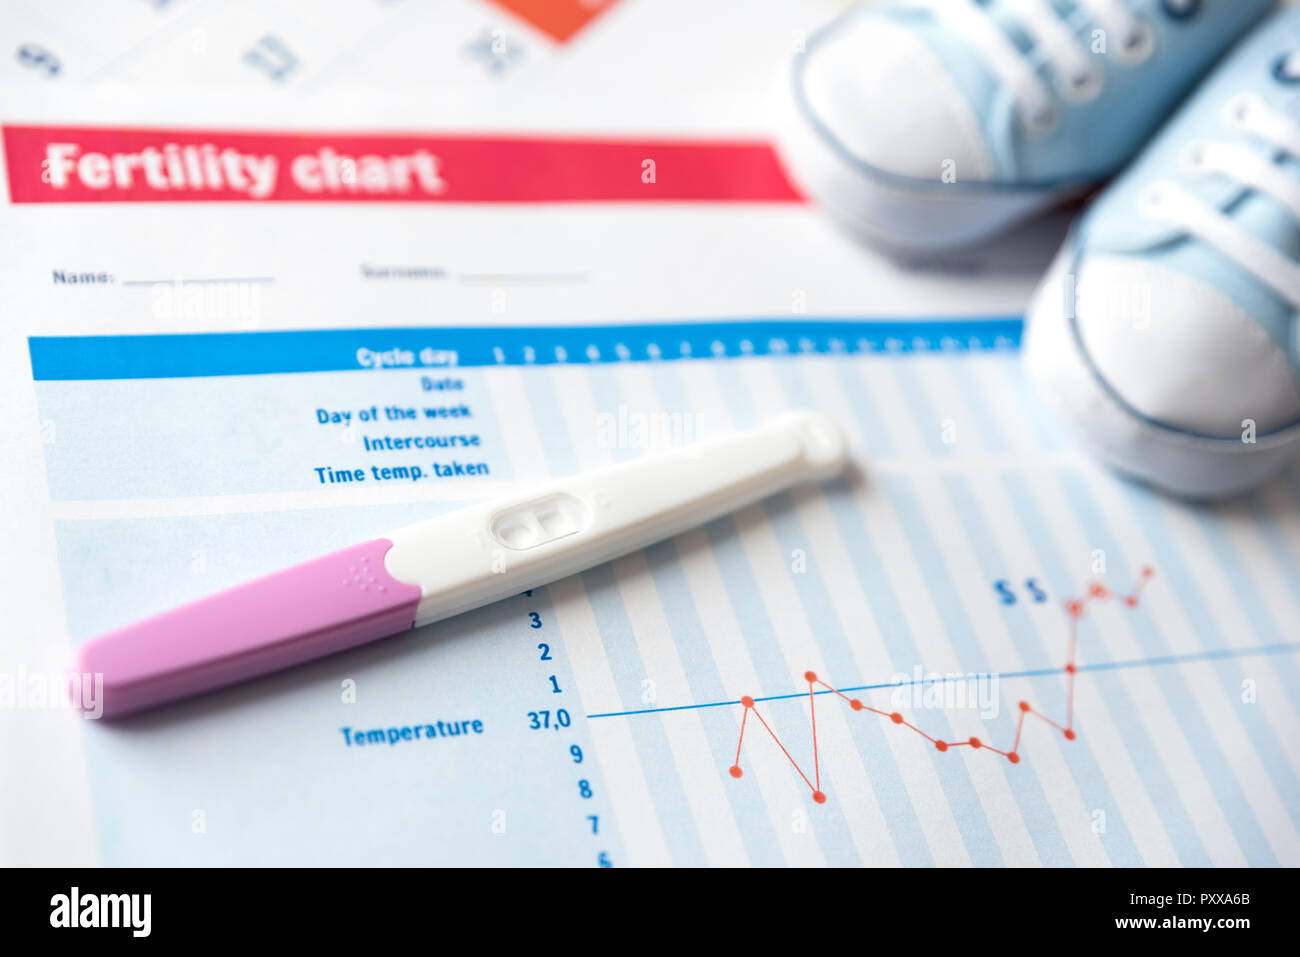 Pregnancy test and baby shoes on fertility chart. Expect a baby concept. Stock Photo